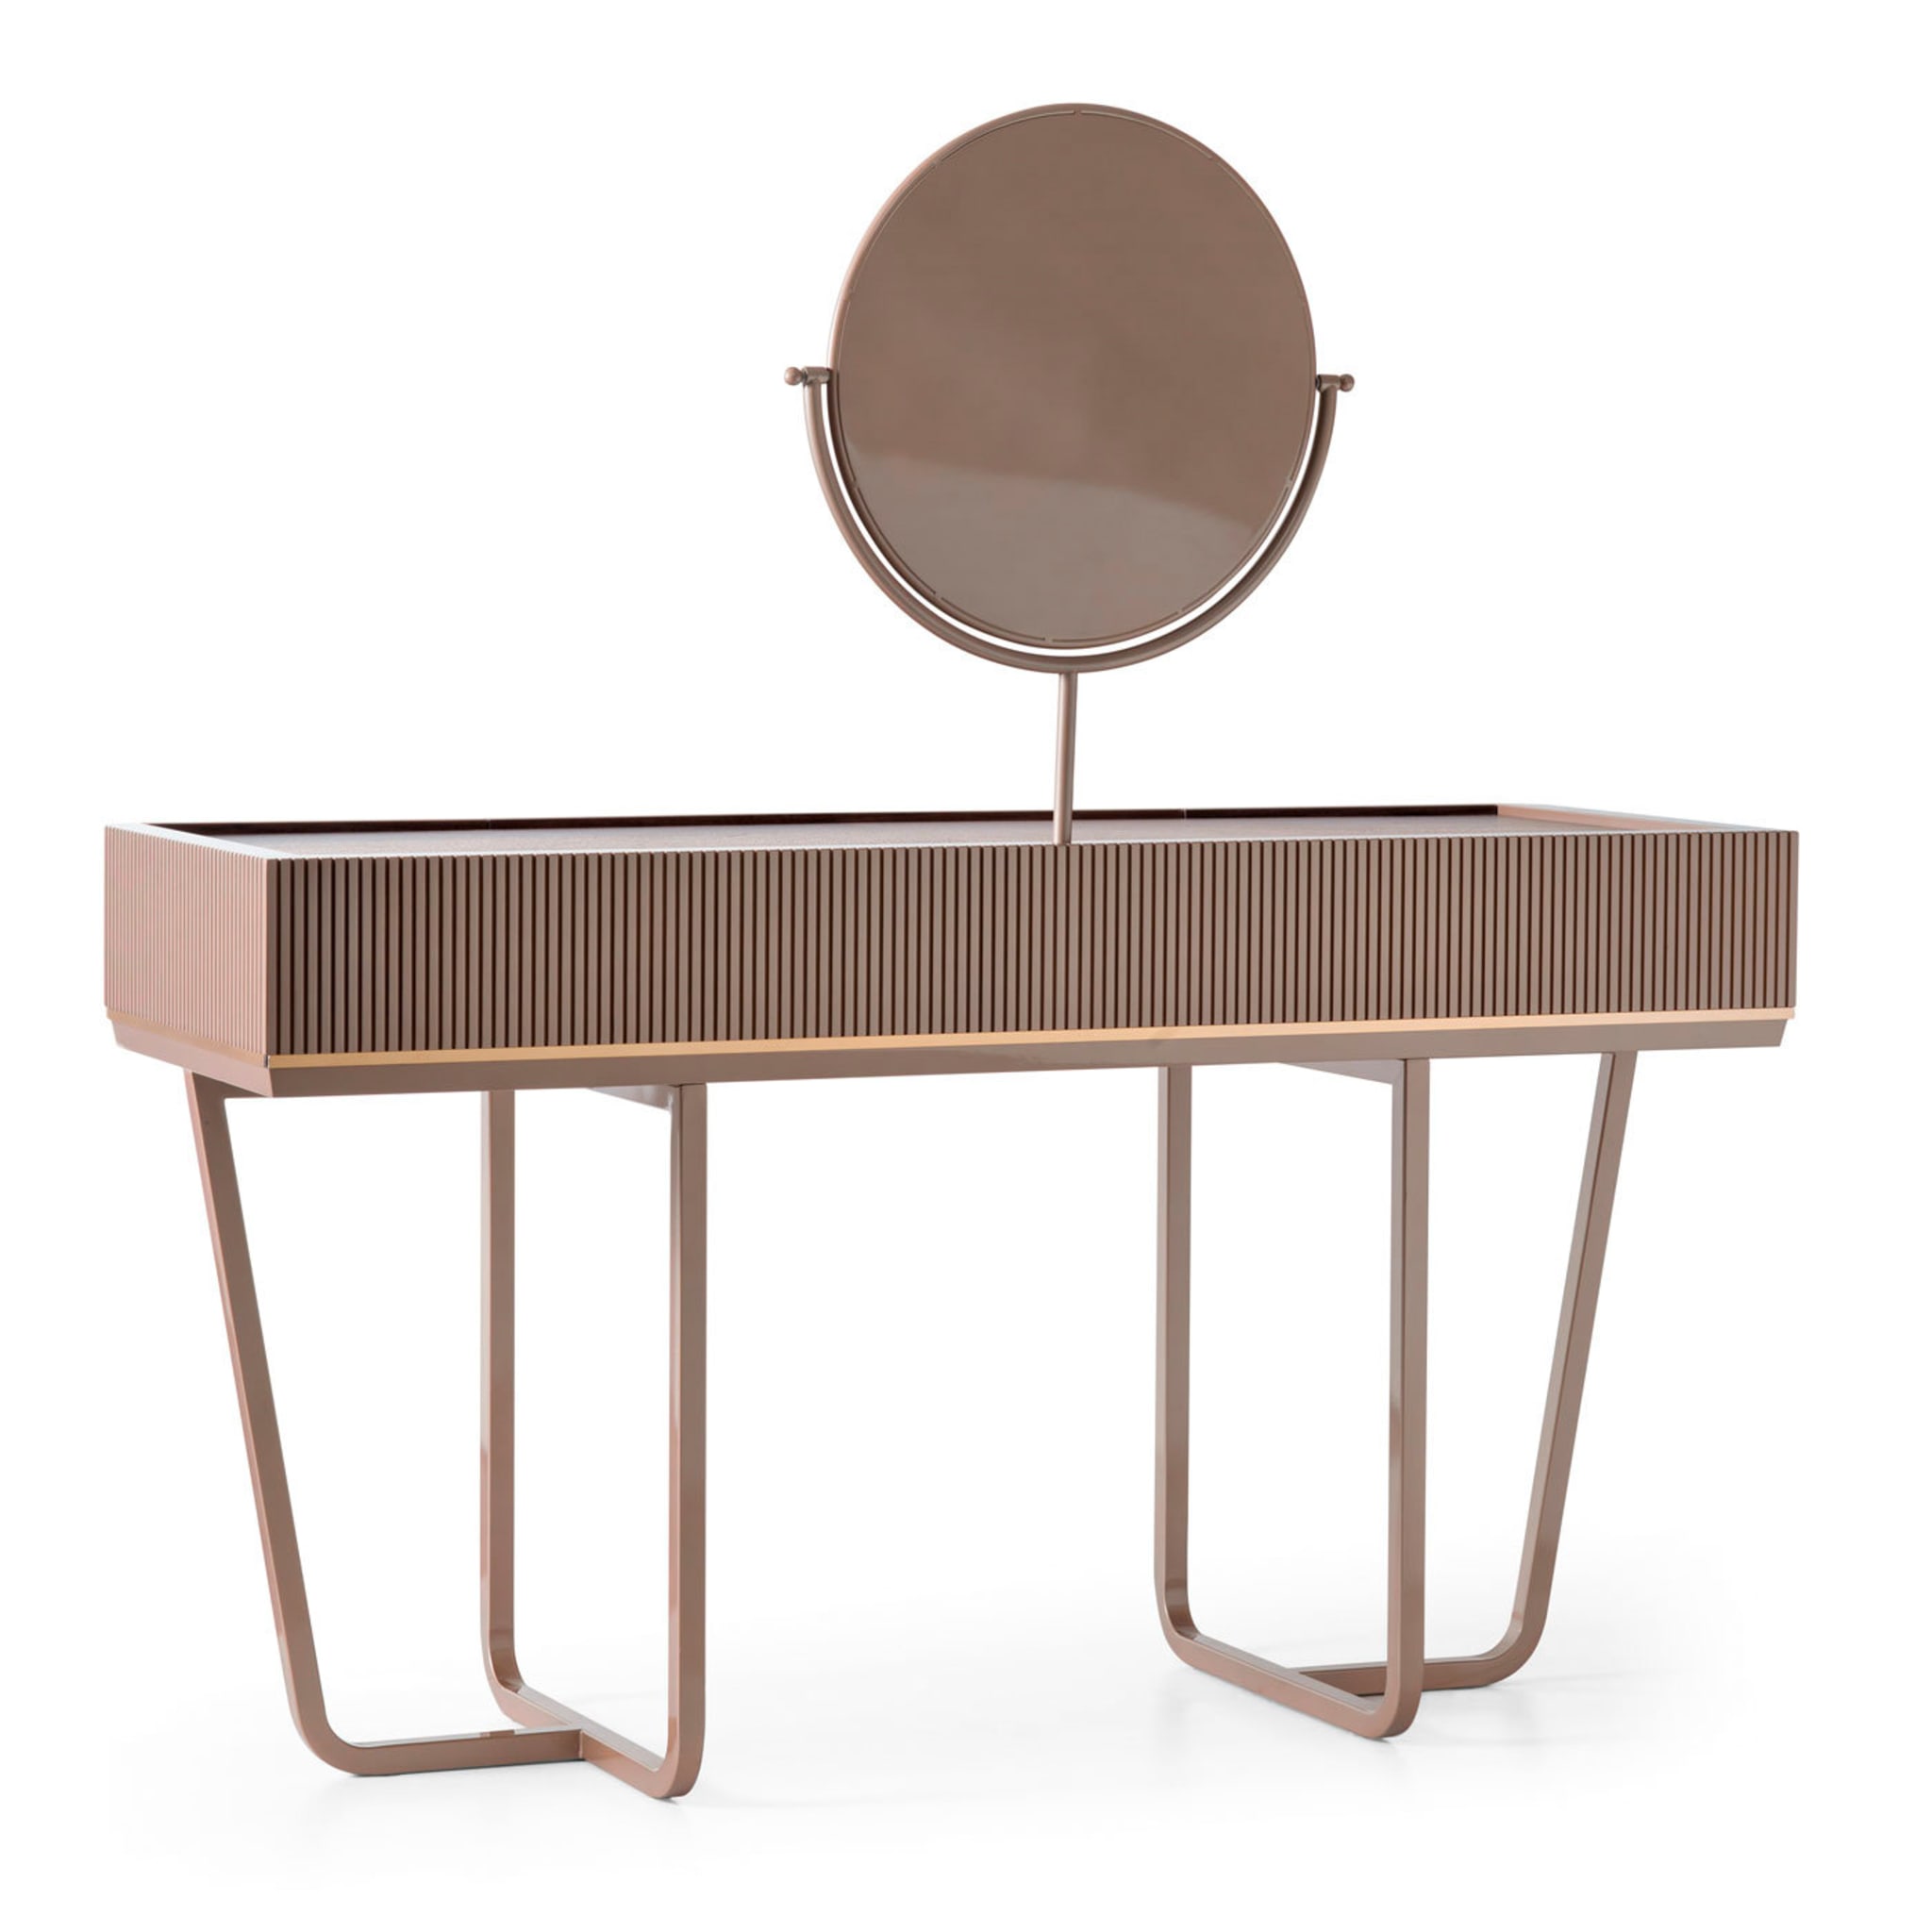 Beverly Canaletto Vanity Desk by Silvano Del Guerra - Alternative view 2